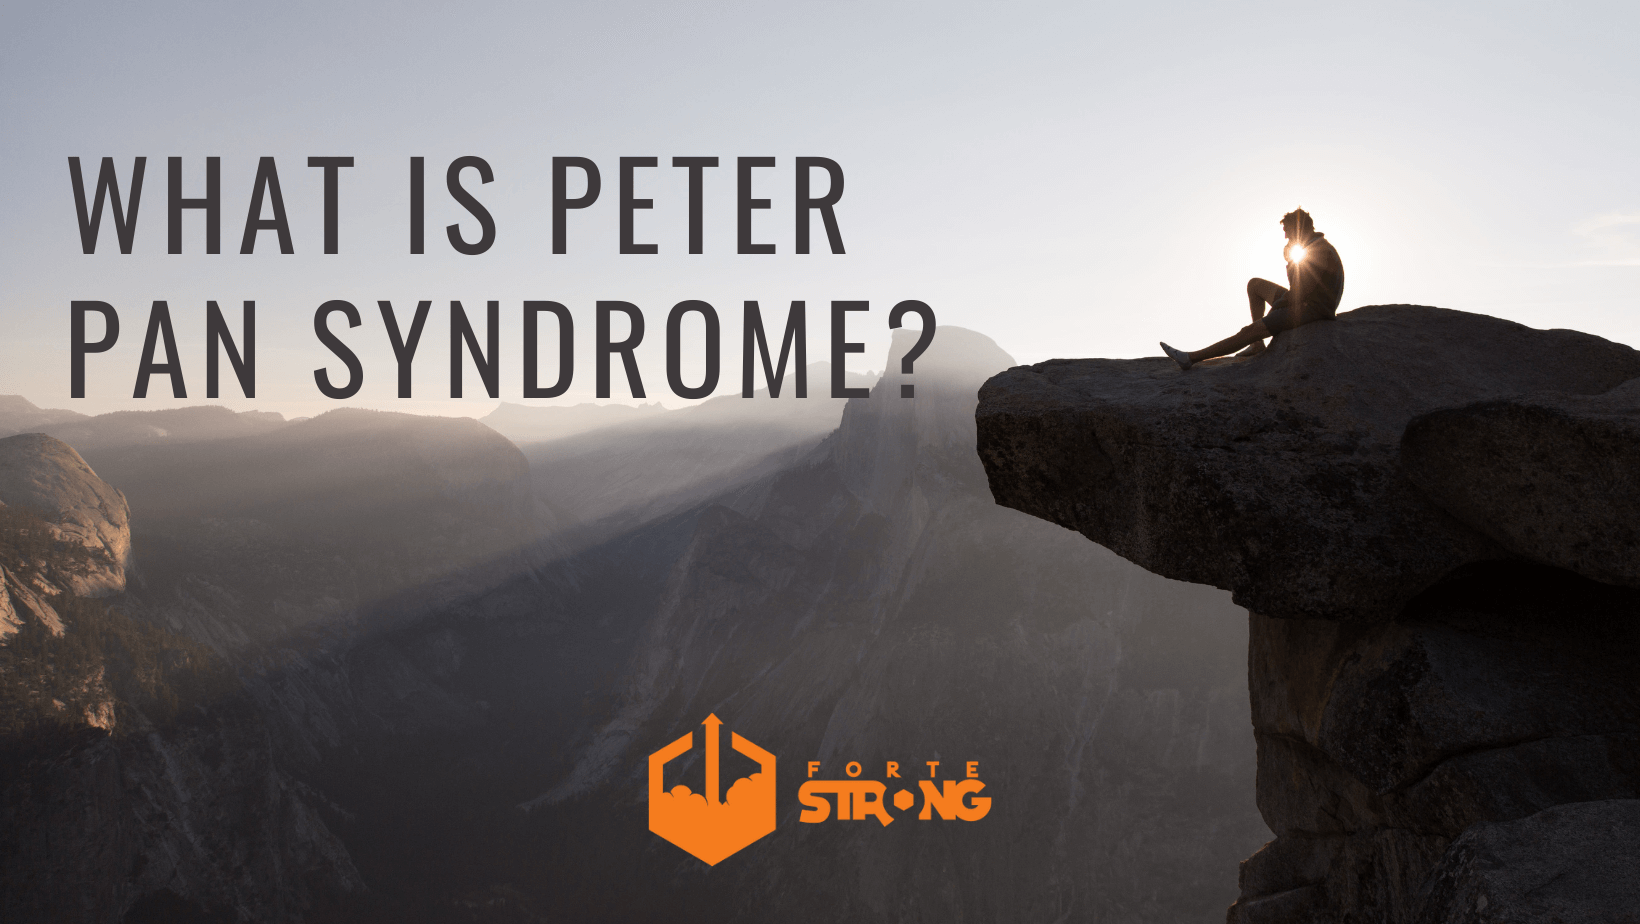 peter pan syndrome